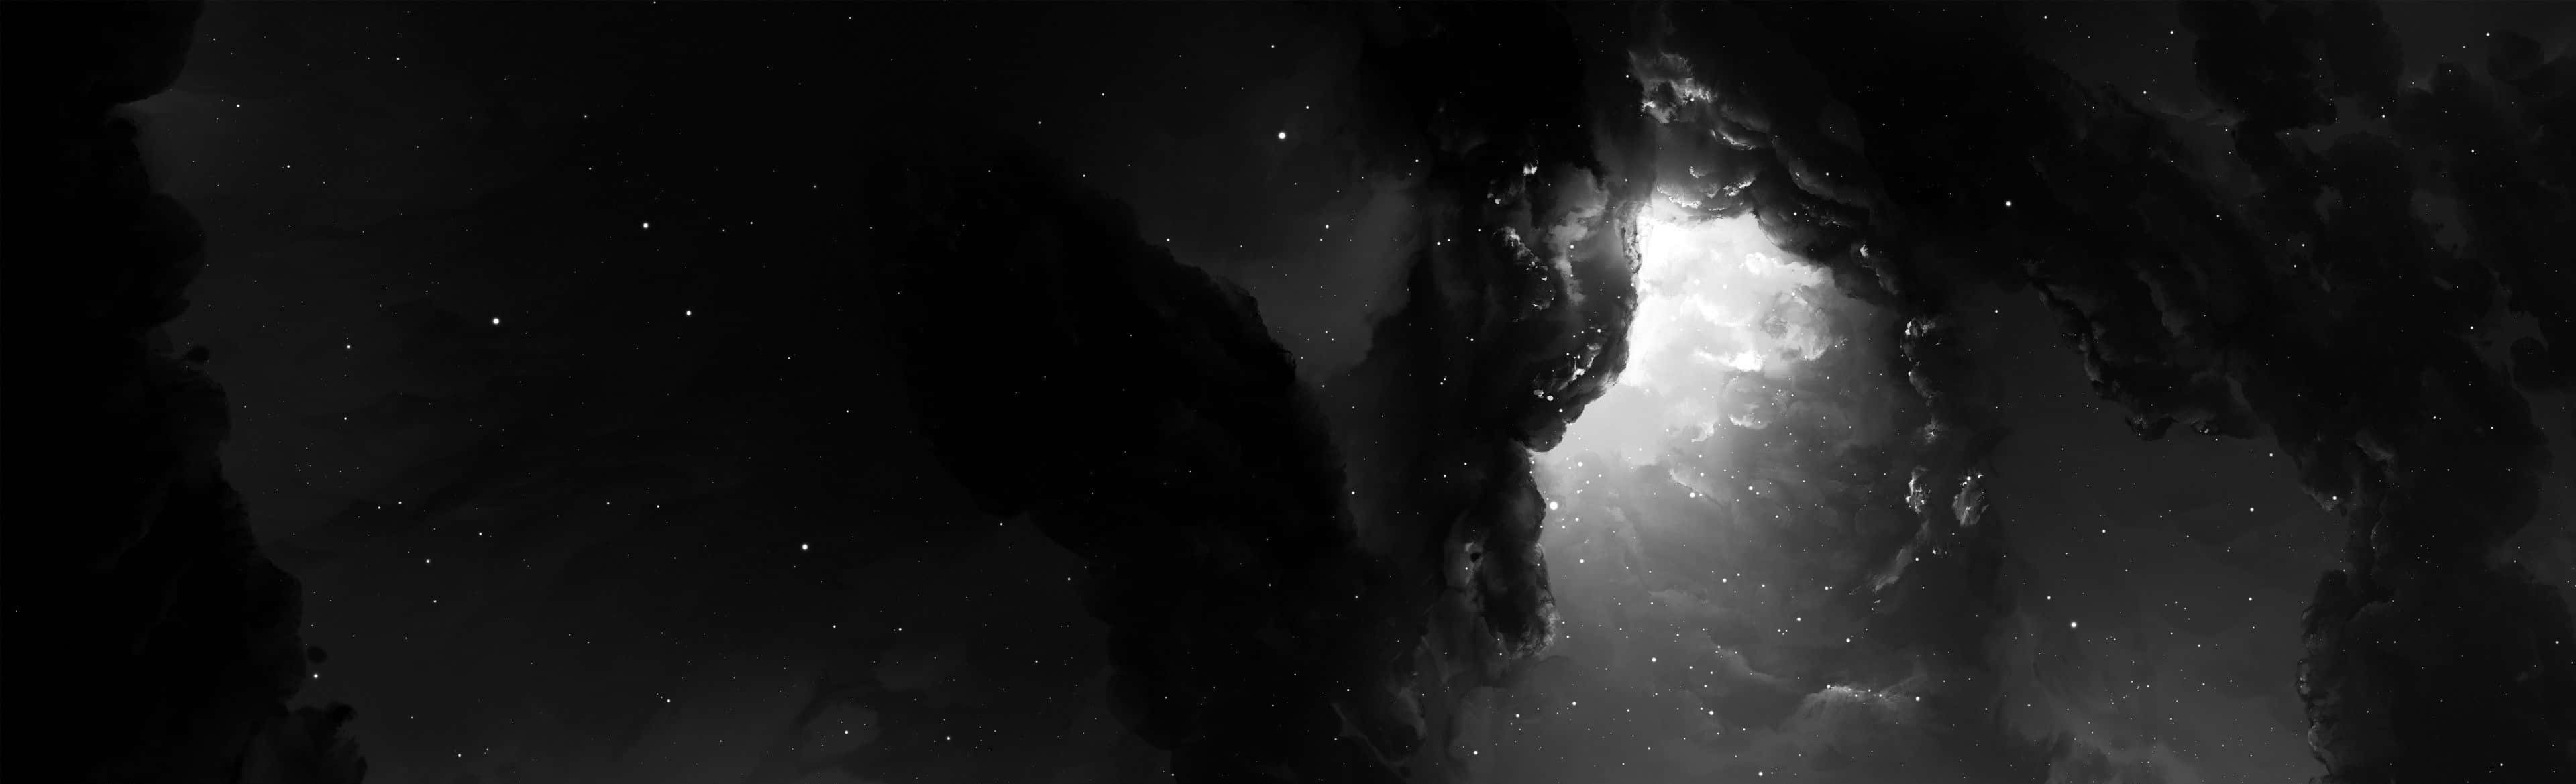 Black And White Galaxy Best Monitor Background